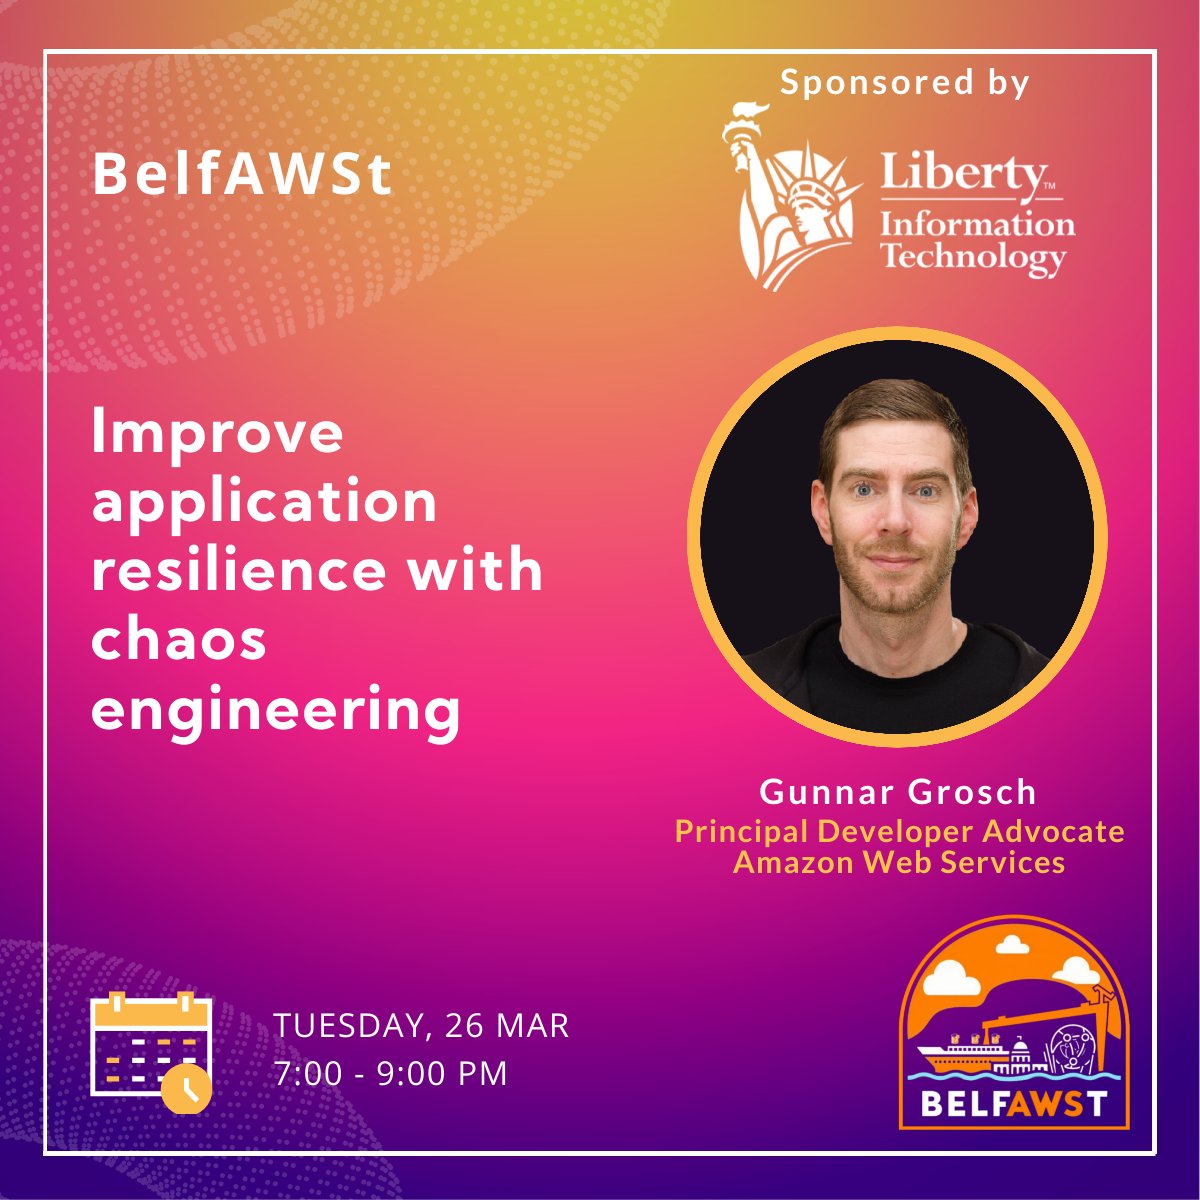 Are you interested in building resilient applications on @awscloud? If so, join us Tuesday night for another amazing @BelfAWSt_UG meetup. We'll be joined by @GunnarGrosch, who will walk us through the process of using chaos engineering ☁️ Sign up here - meetup.com/belfawst-meetu…